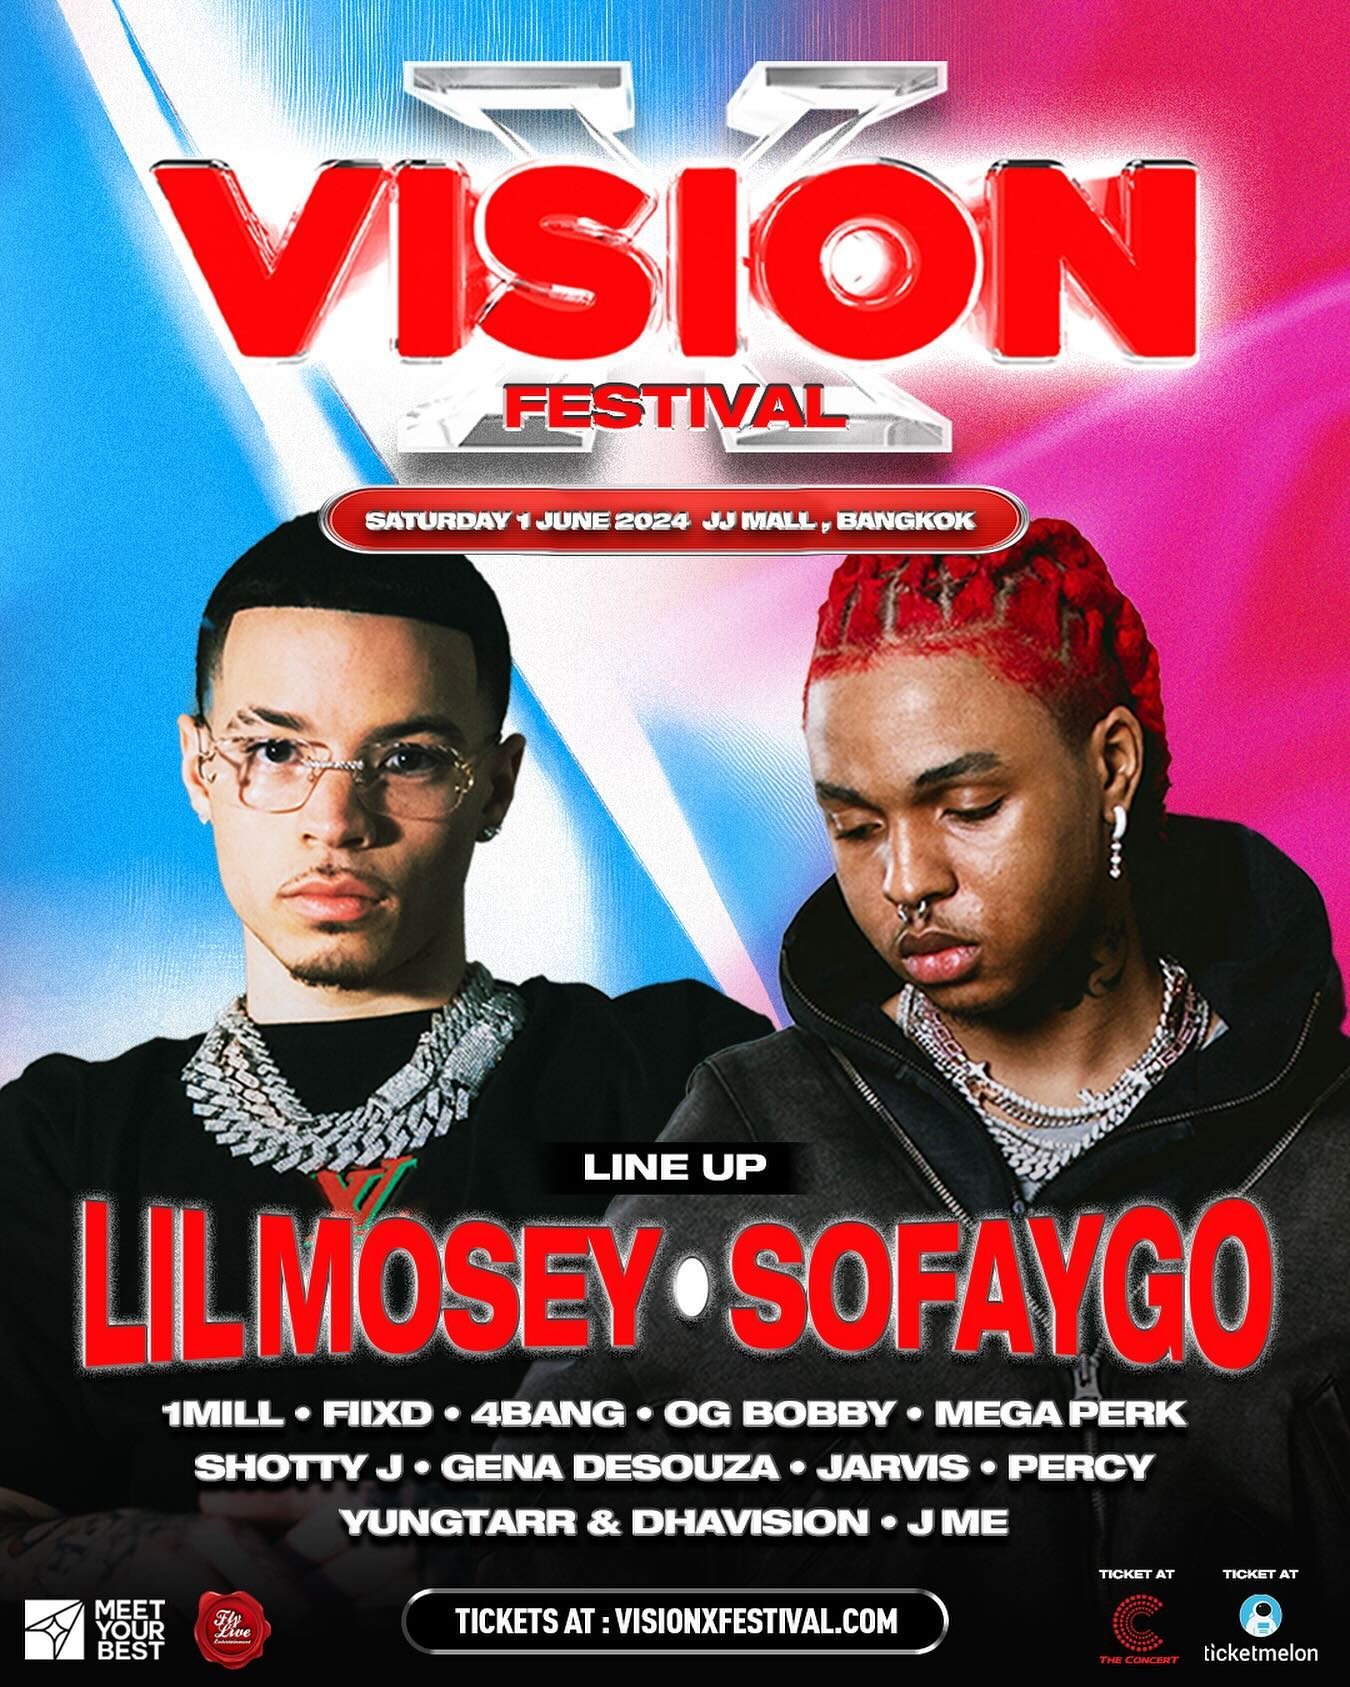 LINE UP 🔥‼️ DON&rsquo;T MISS OUT YOUR LAST CHANCE AT OUR FIRST VISION X FESTIVAL ❌

TIER 3 TICKETS OPEN NOW 👇
Get tickets now 👉🏼 visionxfestival.com

DATE - 1 JUNE 2024 📆

VENUE - JJ HALL, JJ MALL, BANGKOK 📍

#visionxfestival #VisionX #visionxt